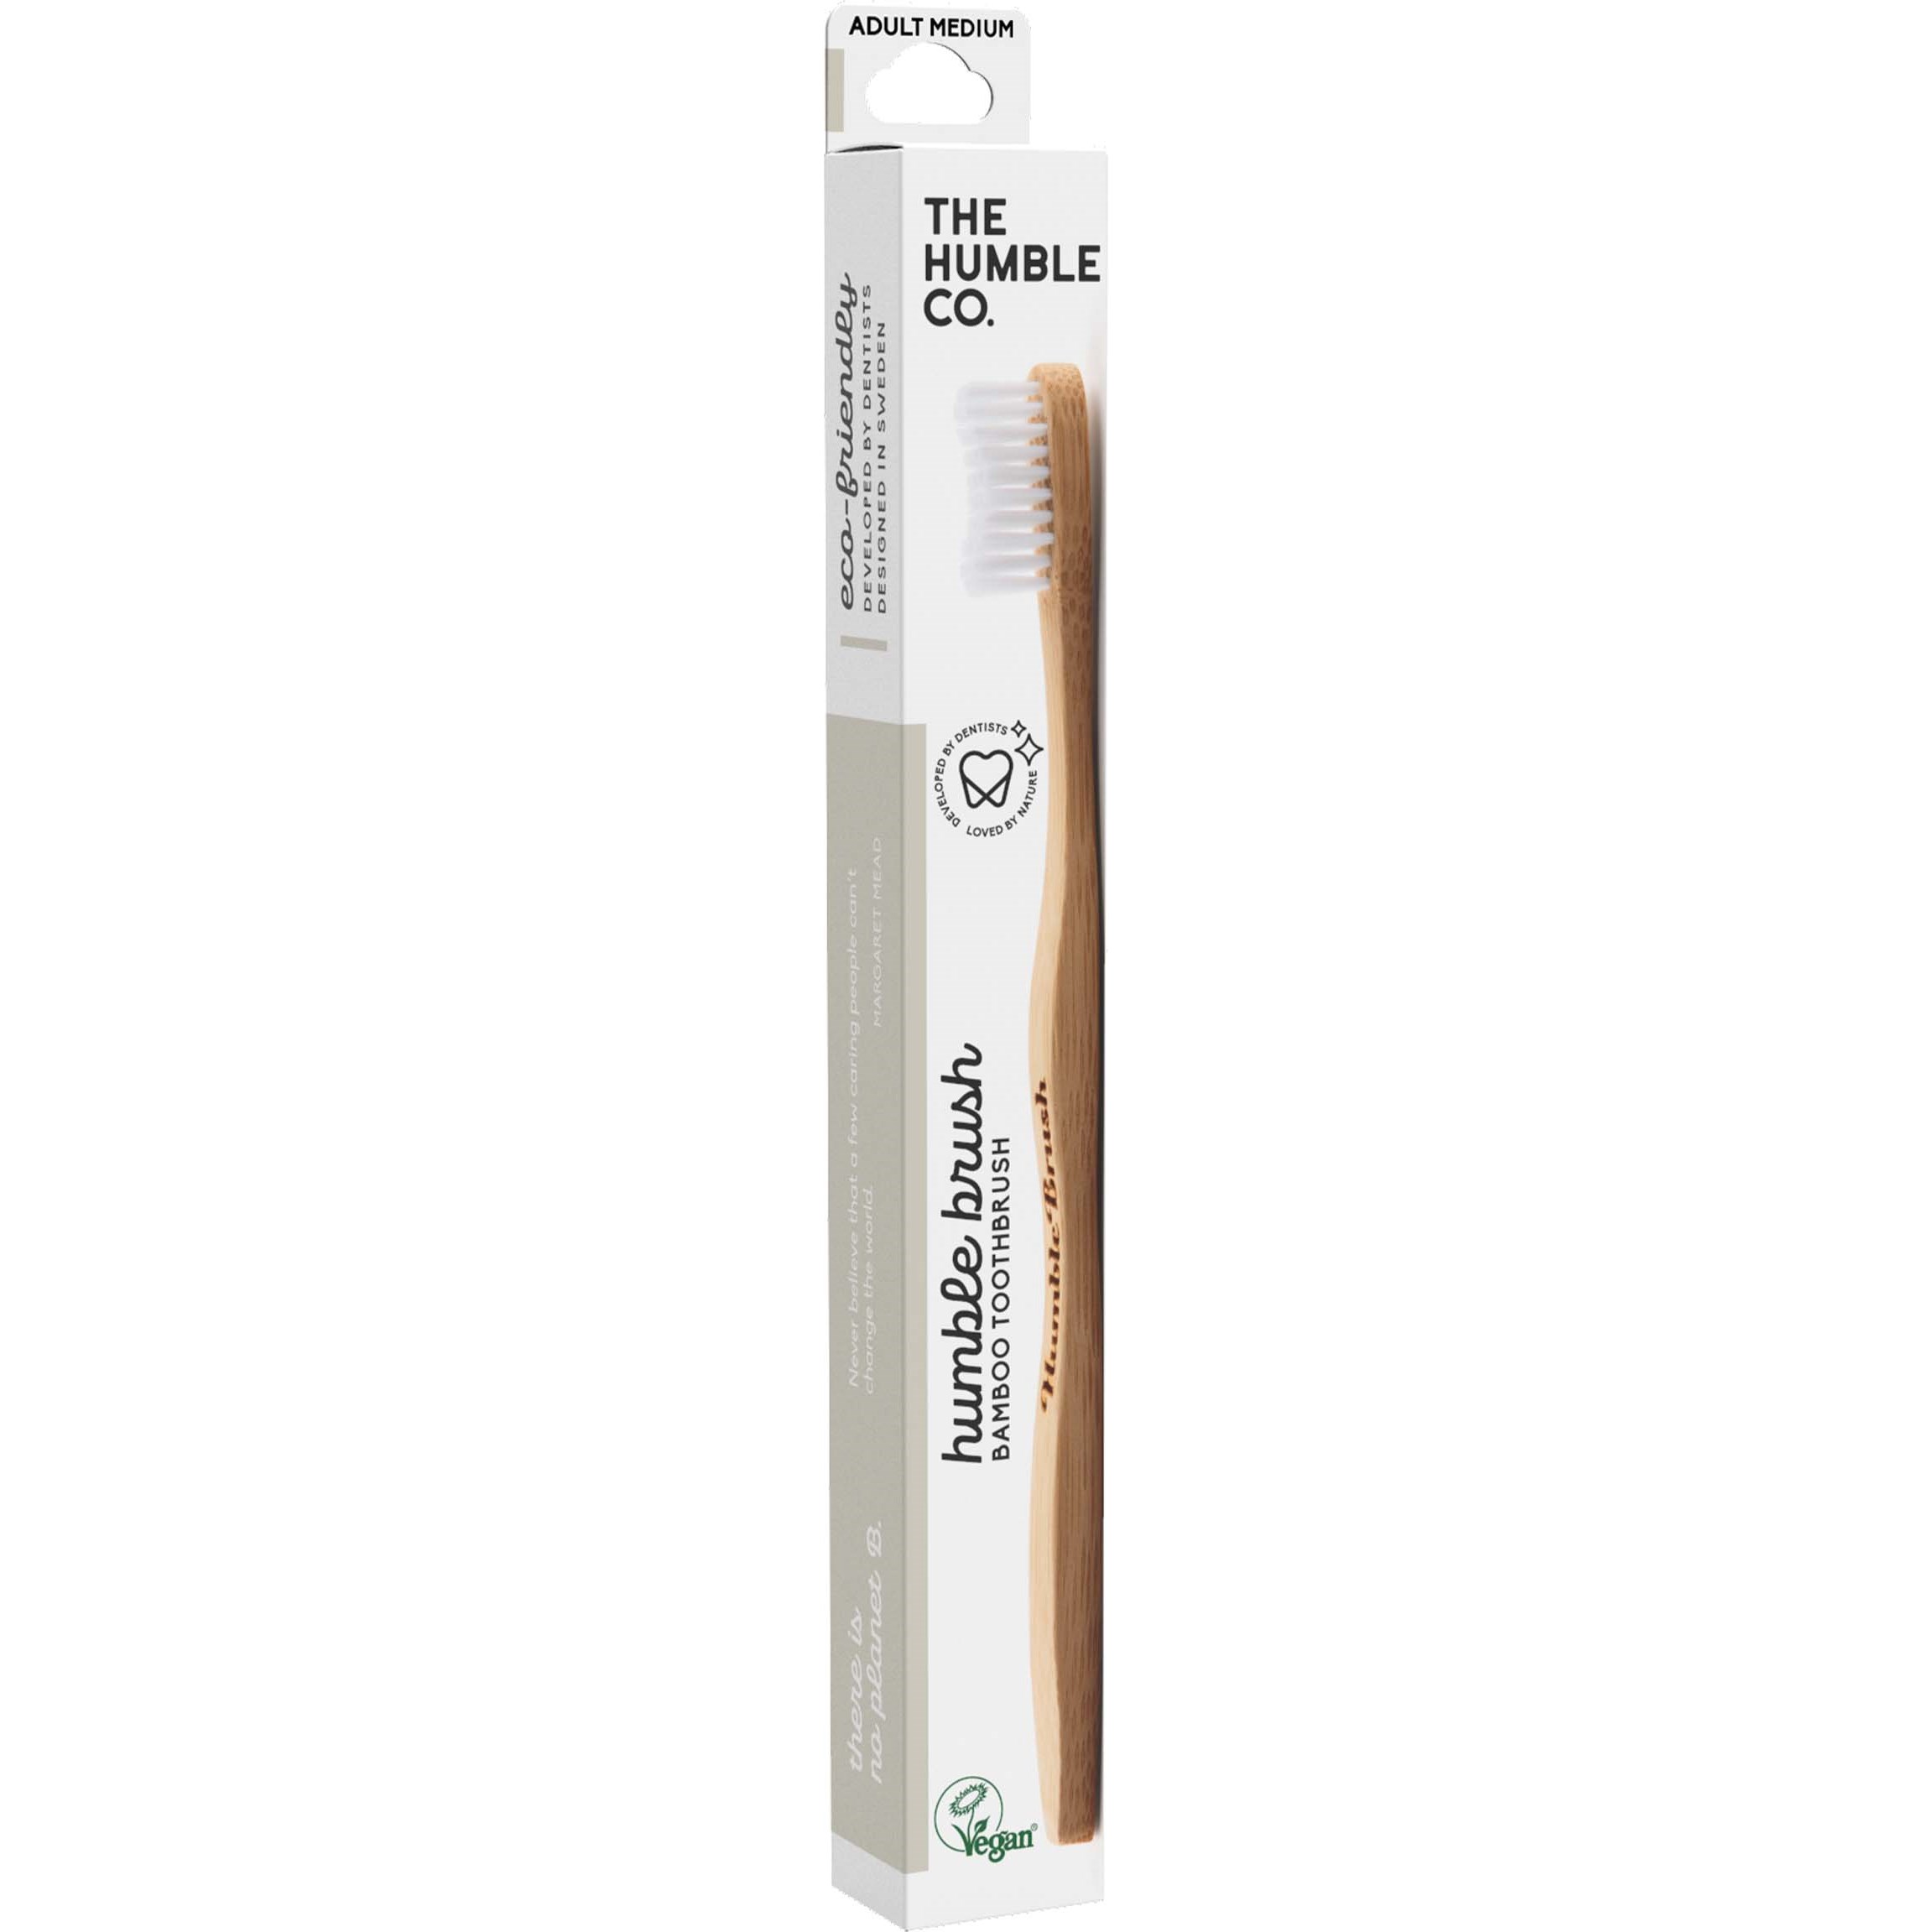 The Humble Co. Bamboo Toothbrush Adult Medium White